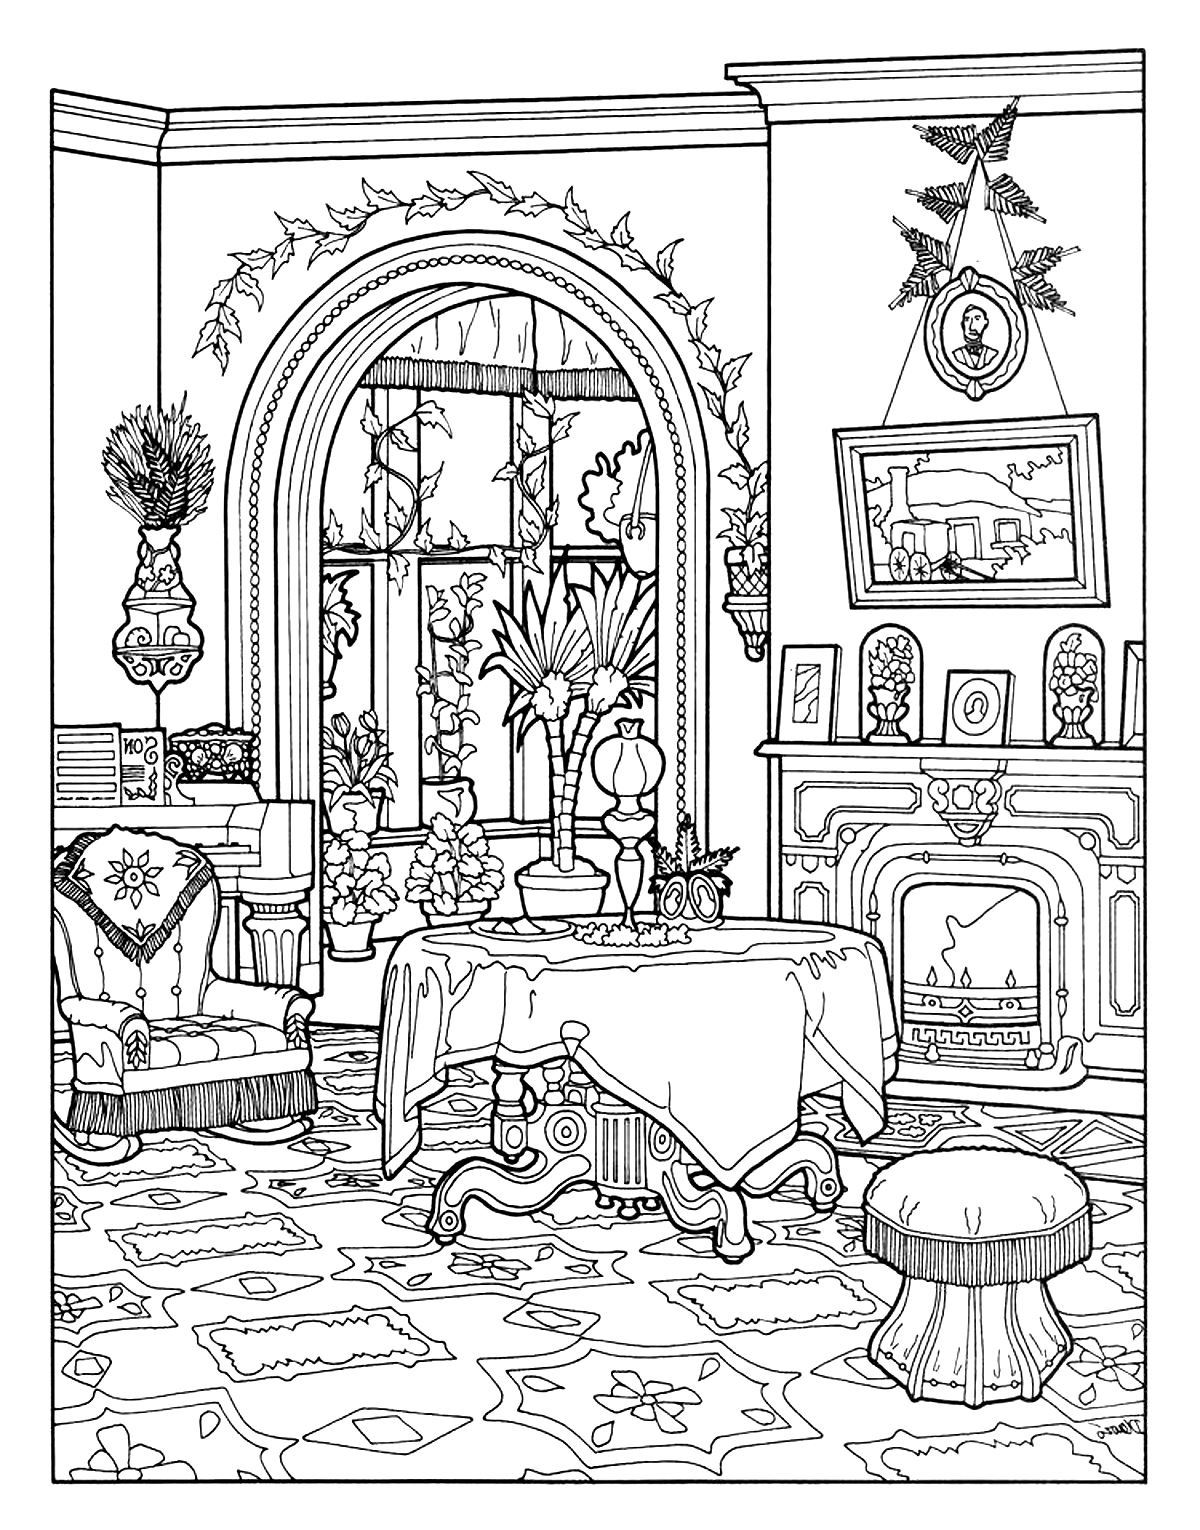 Coloring sheet of a Victorian interior